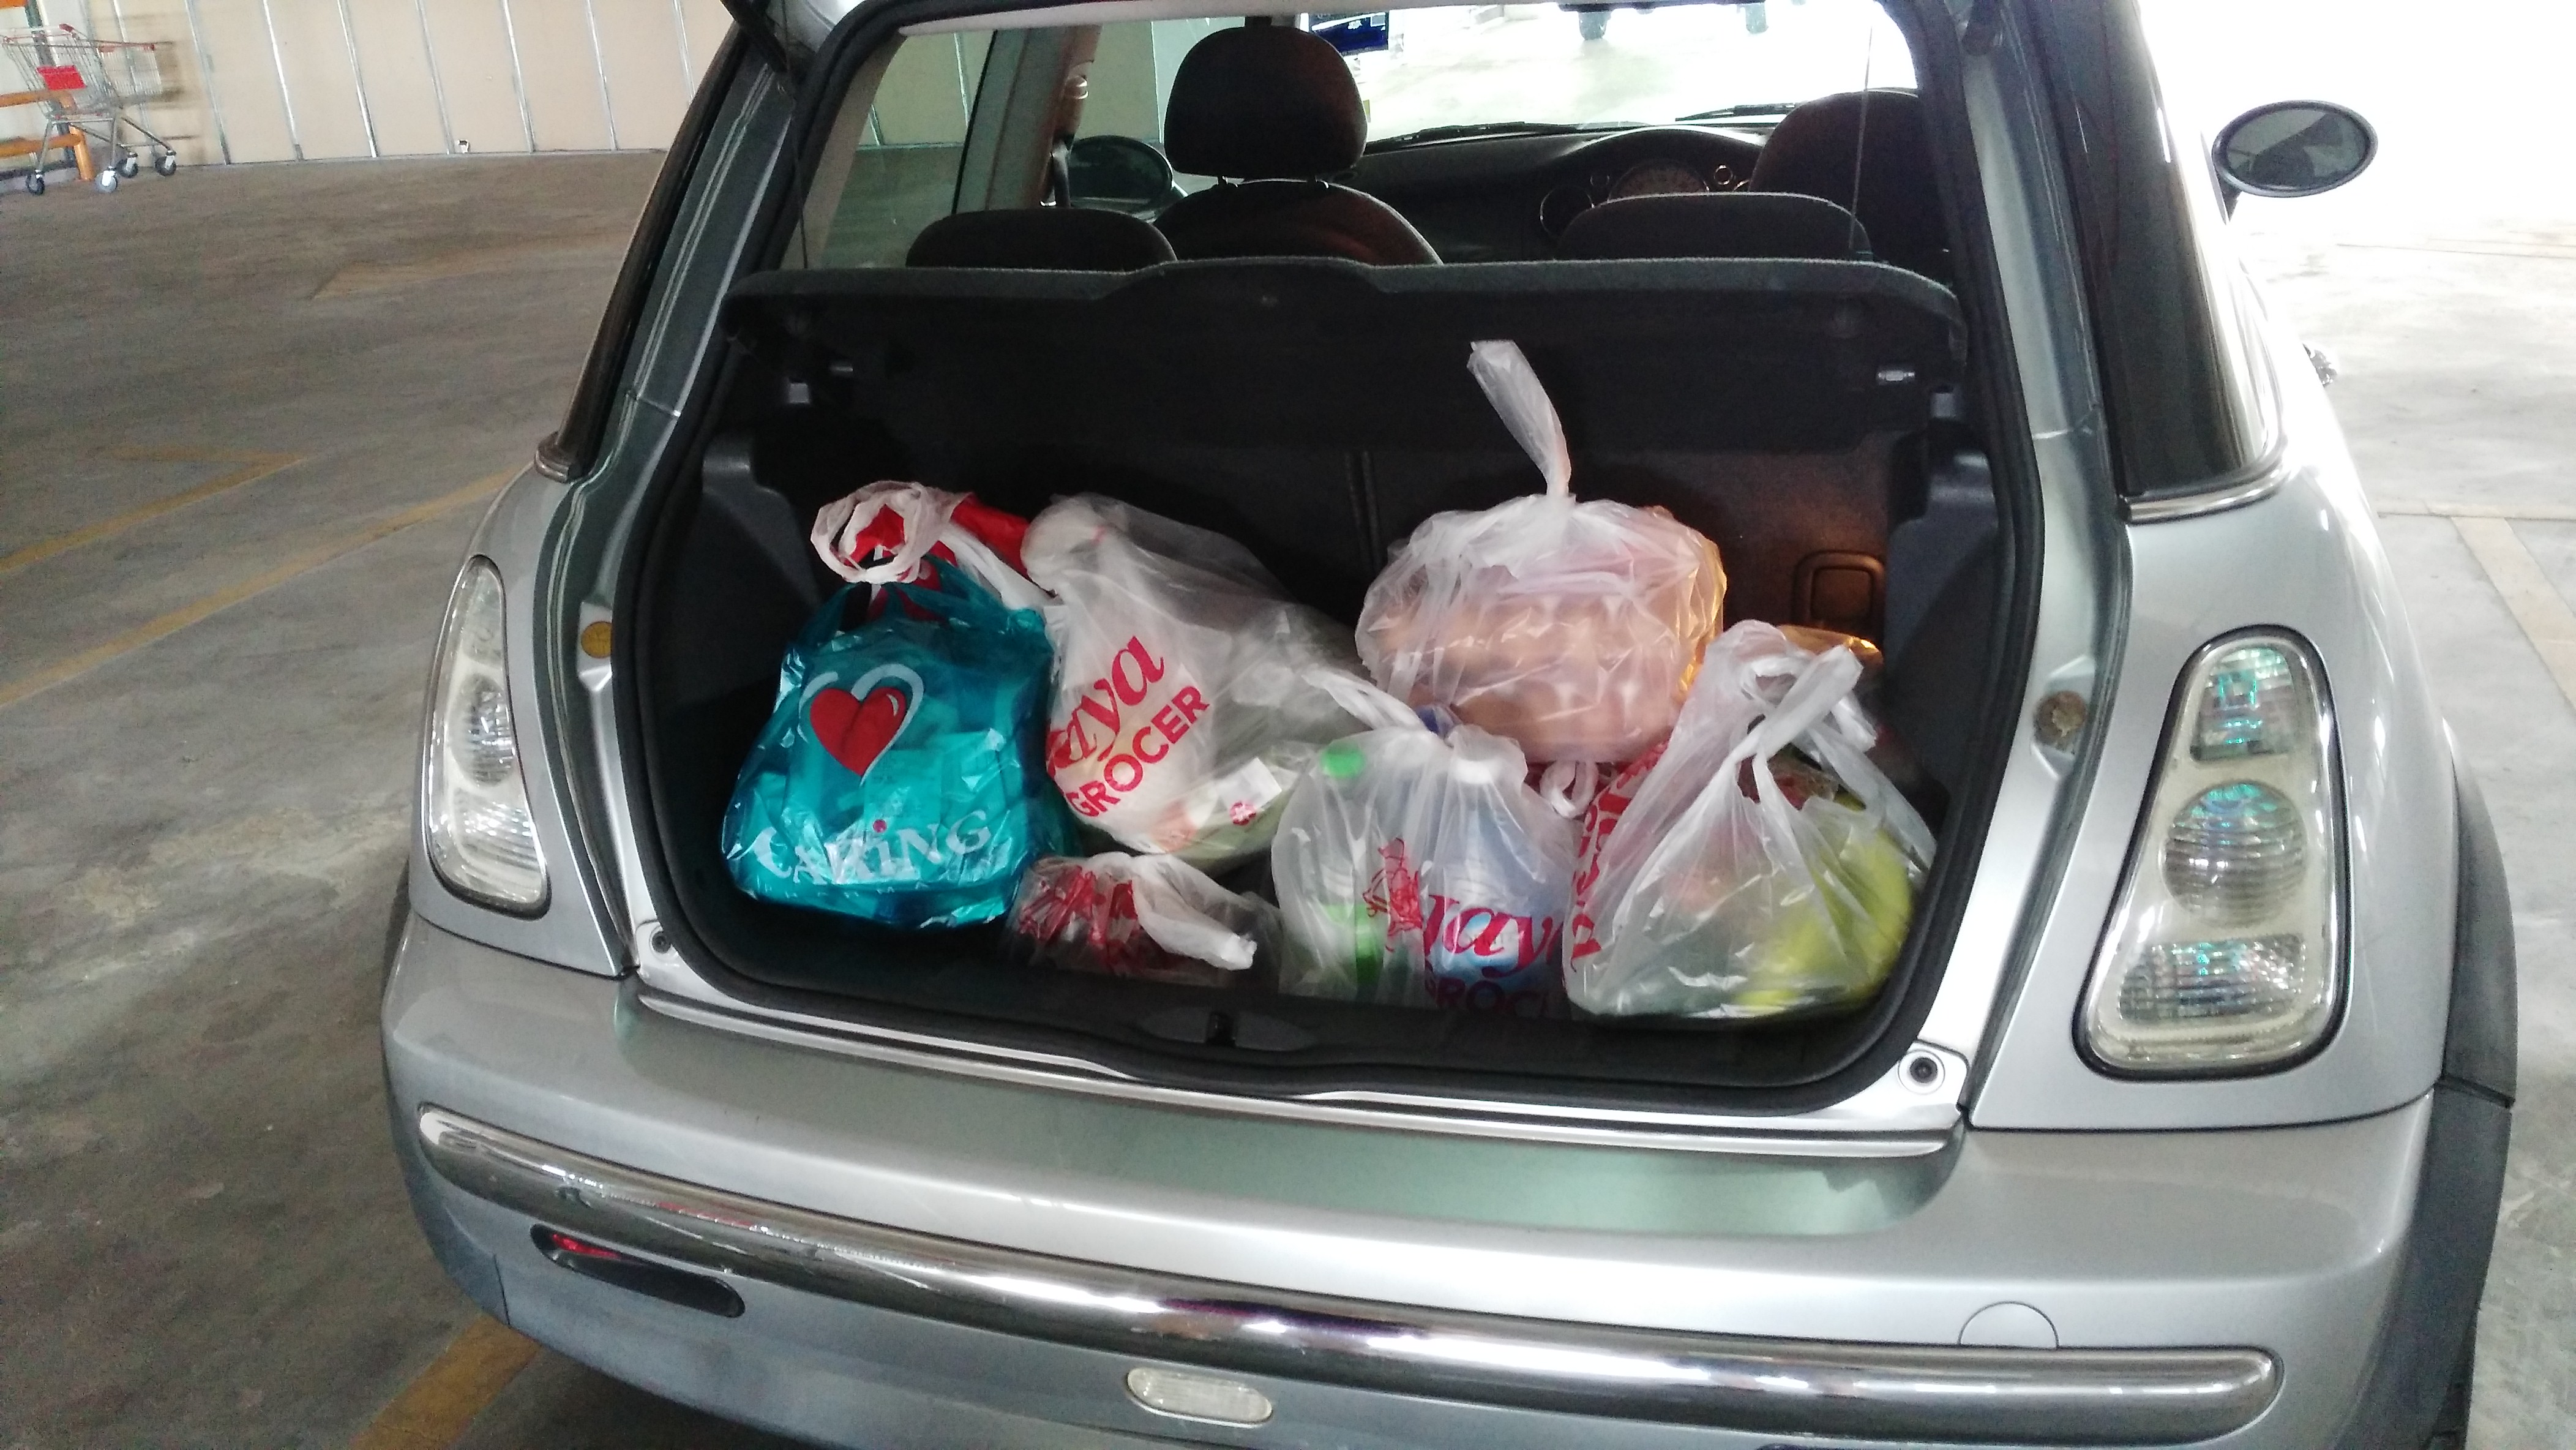 Loading up the car after going grocery shopping.